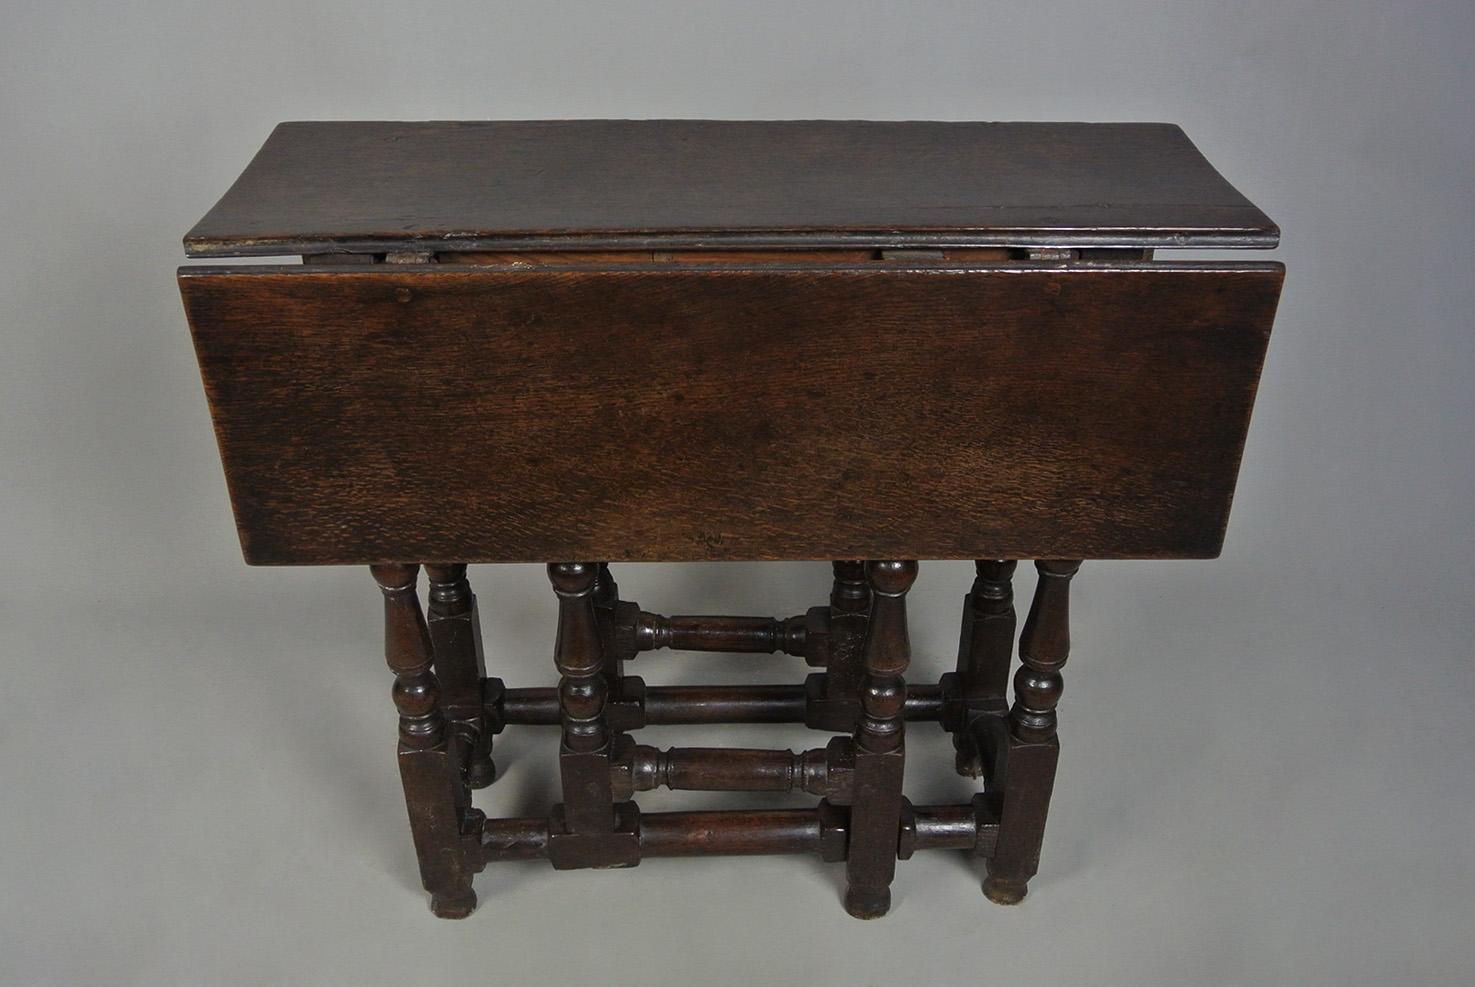 Original Queen Anne Oak Small Supper Table with Provenance c. 1700 For Sale 1